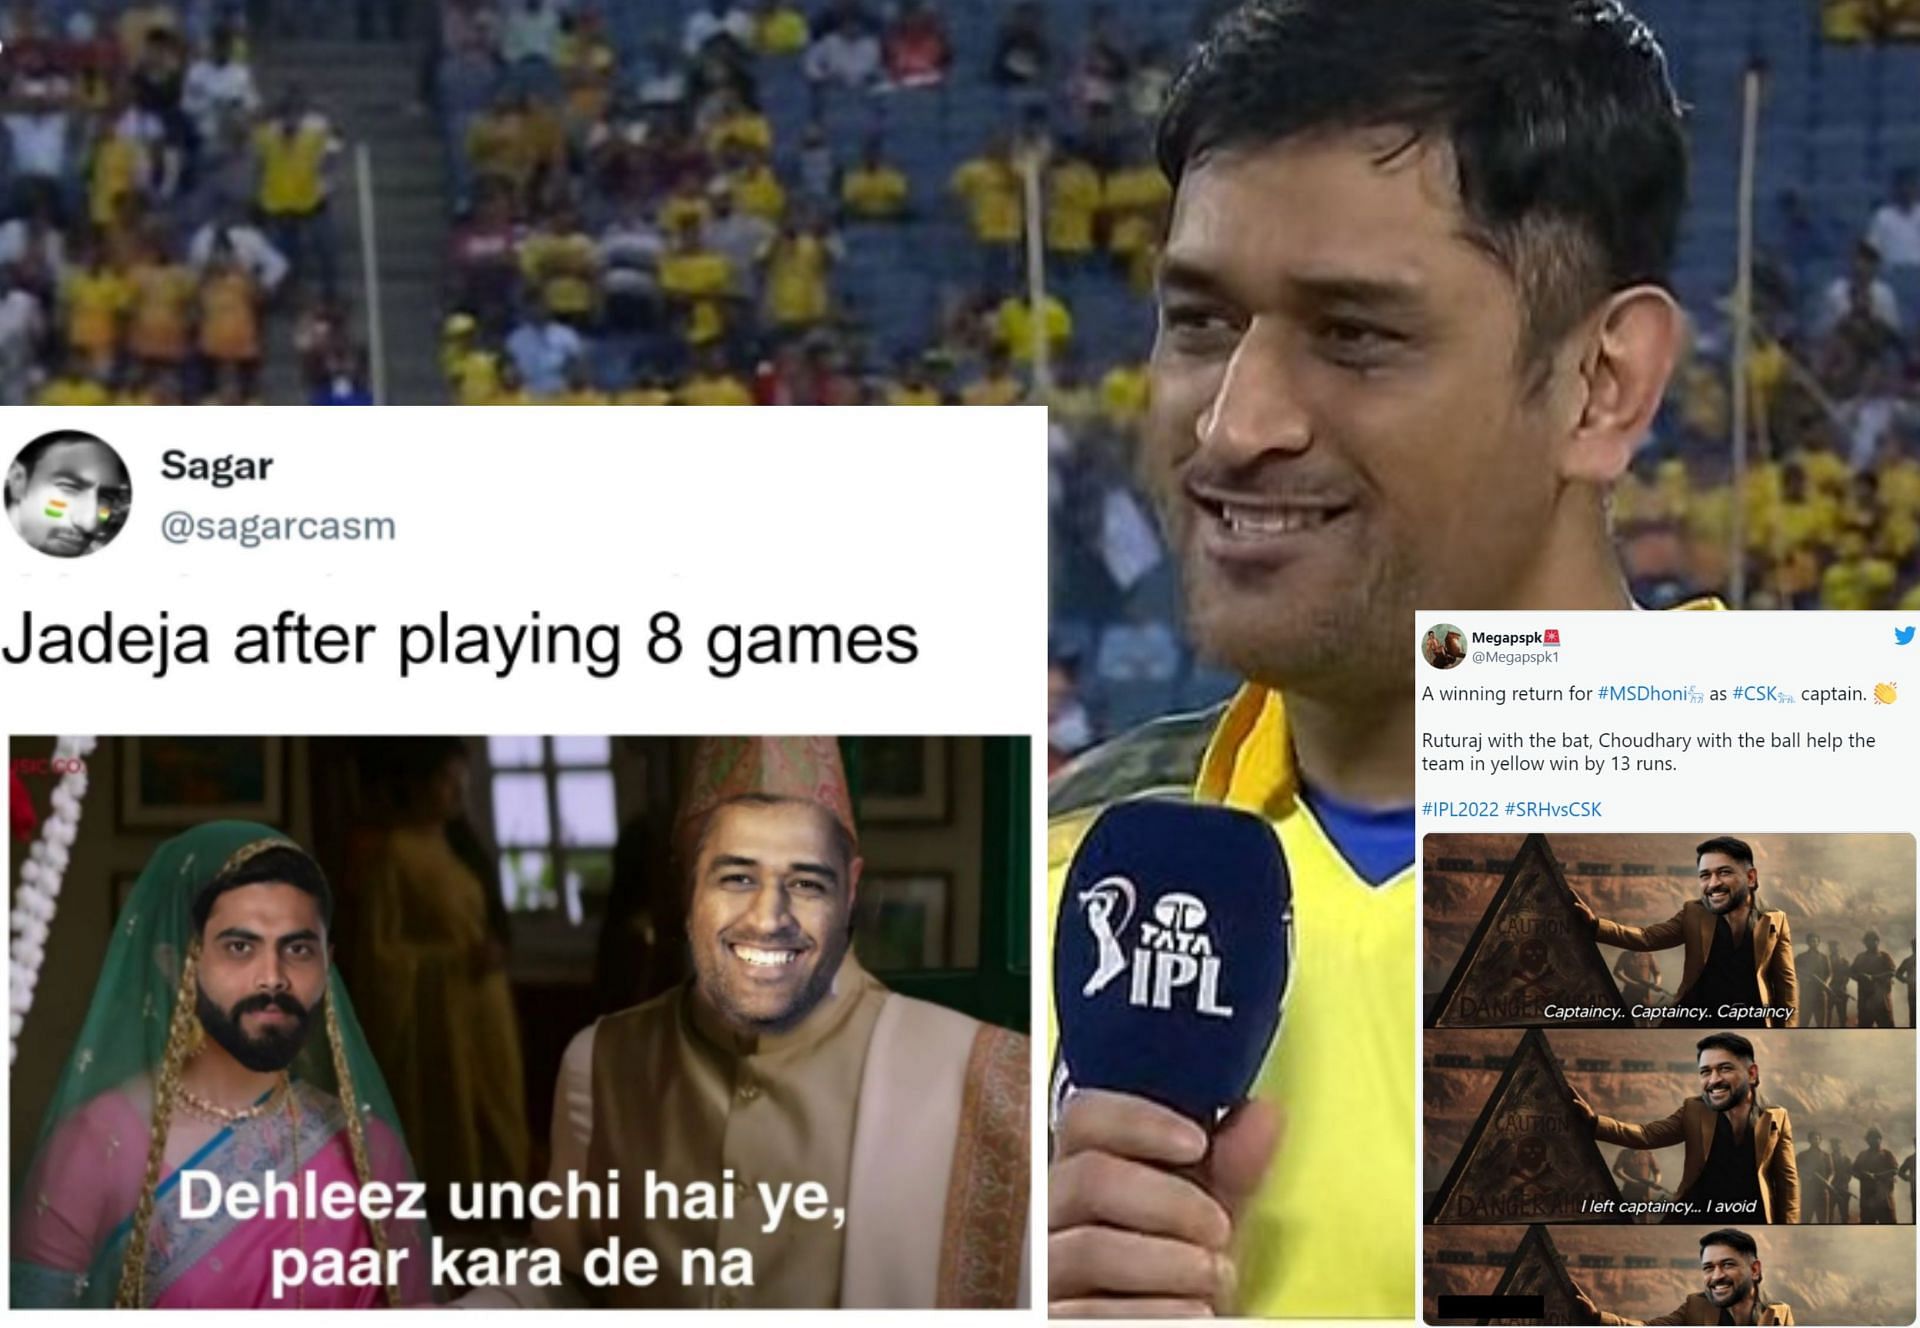 SRH vs CSK memes, IPL 2022: Top 10 funny memes from the latest match